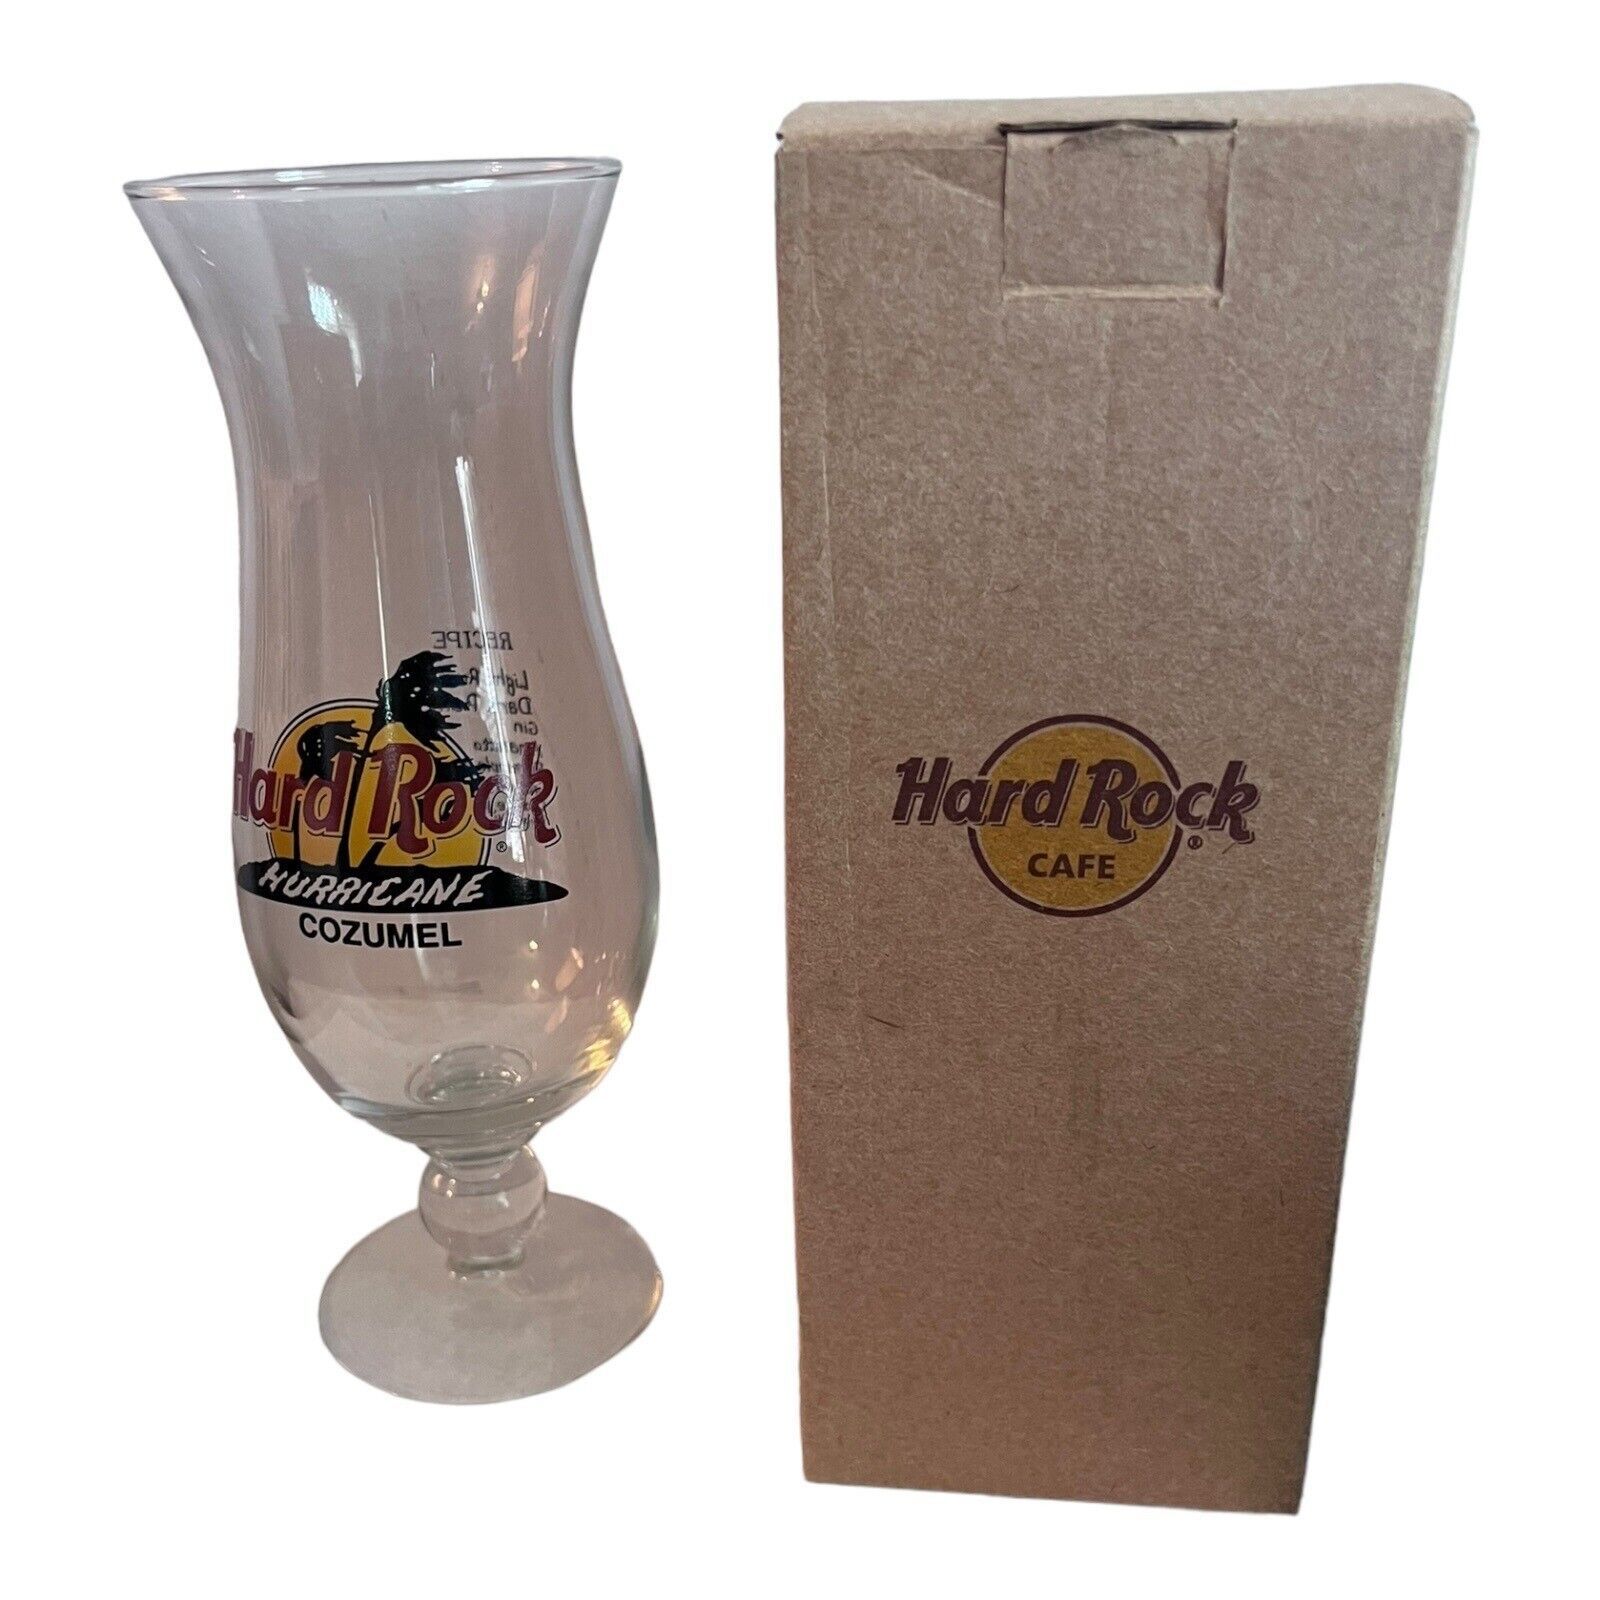 Primary image for Hard Rock Cafe Hurricane Cocktail Drink Glass COZUMEL 9" With Recipe and Box